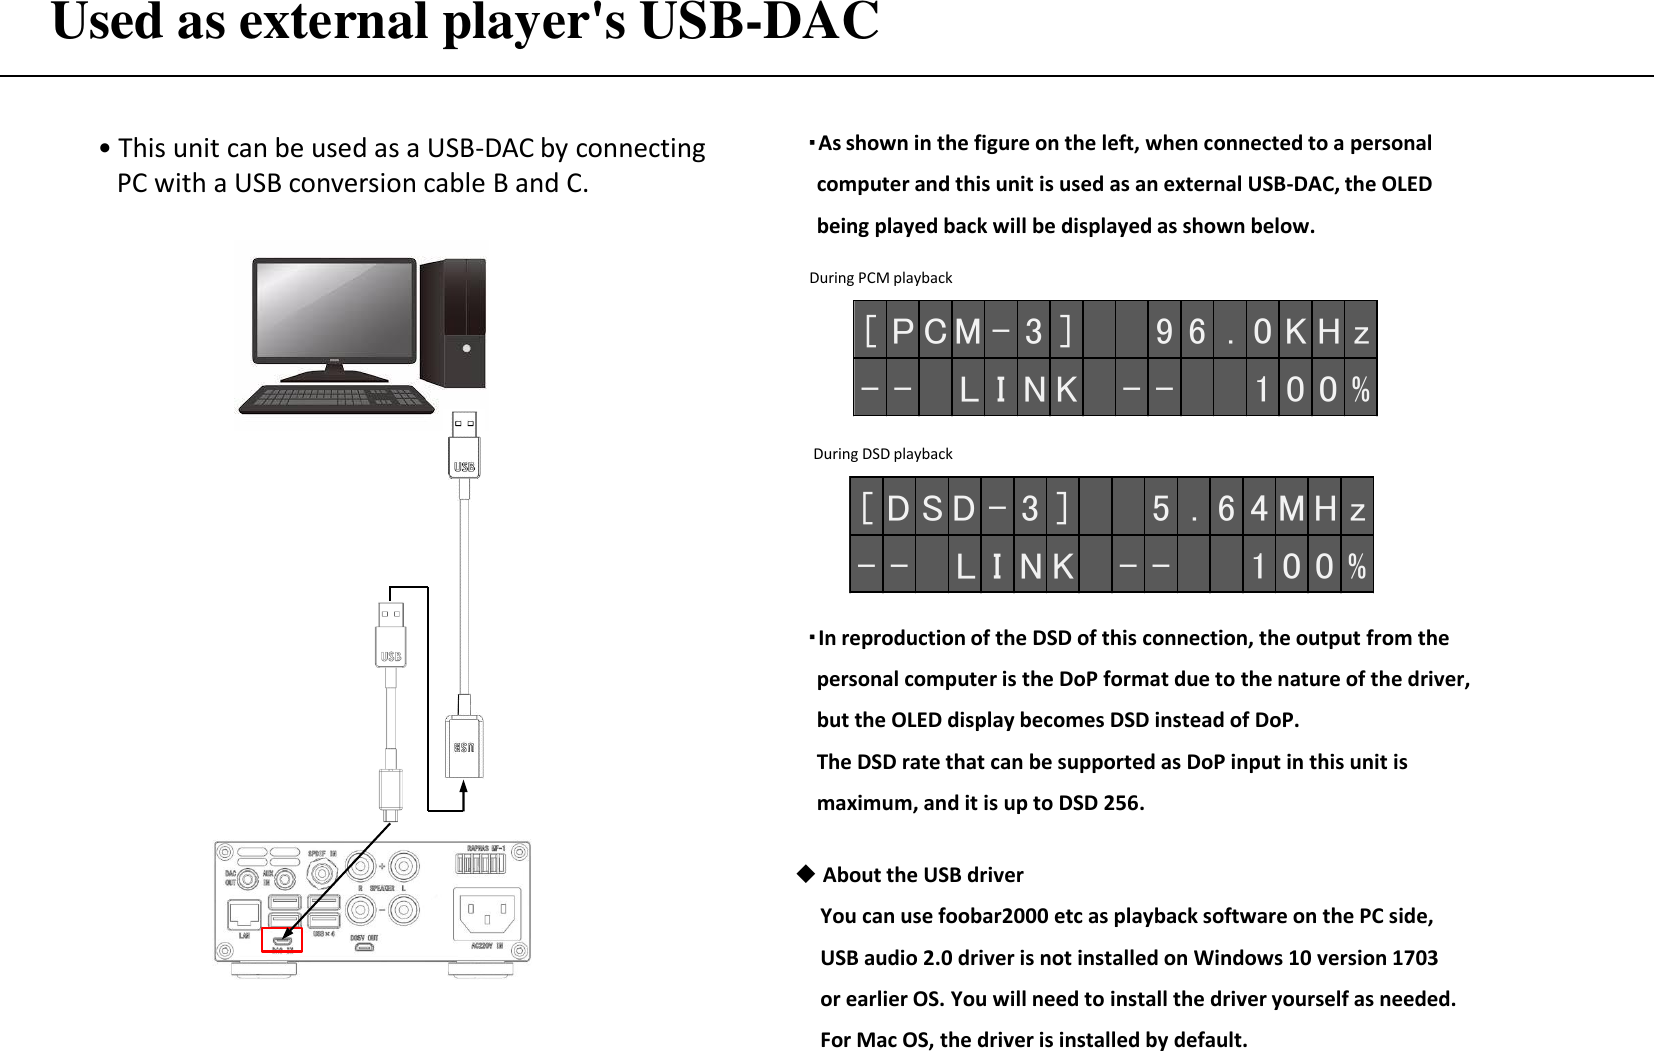 Used as external player&apos;s USB-DAC • This unit can be used as a USB-DAC by connecting    PC with a USB conversion cable B and C. About the USB driver      You can use foobar2000 etc as playback software on the PC side,         USB audio 2.0 driver is not installed on Windows 10 version 1703       or earlier OS. You will need to install the driver yourself as needed.      For Mac OS, the driver is installed by default. ・As shown in the figure on the left, when connected to a personal     computer and this unit is used as an external USB-DAC, the OLED      being played back will be displayed as shown below. [ D S D - 3 ] 5 . 6 4MH z- - L I N K - - 1 0 0 %[ P CM- 3 ] 9 6 . 0 K H z- - L I N K - - 1 0 0 %During PCM playback During DSD playback ・In reproduction of the DSD of this connection, the output from the      personal computer is the DoP format due to the nature of the driver,     but the OLED display becomes DSD instead of DoP.   The DSD rate that can be supported as DoP input in this unit is    maximum, and it is up to DSD 256. 